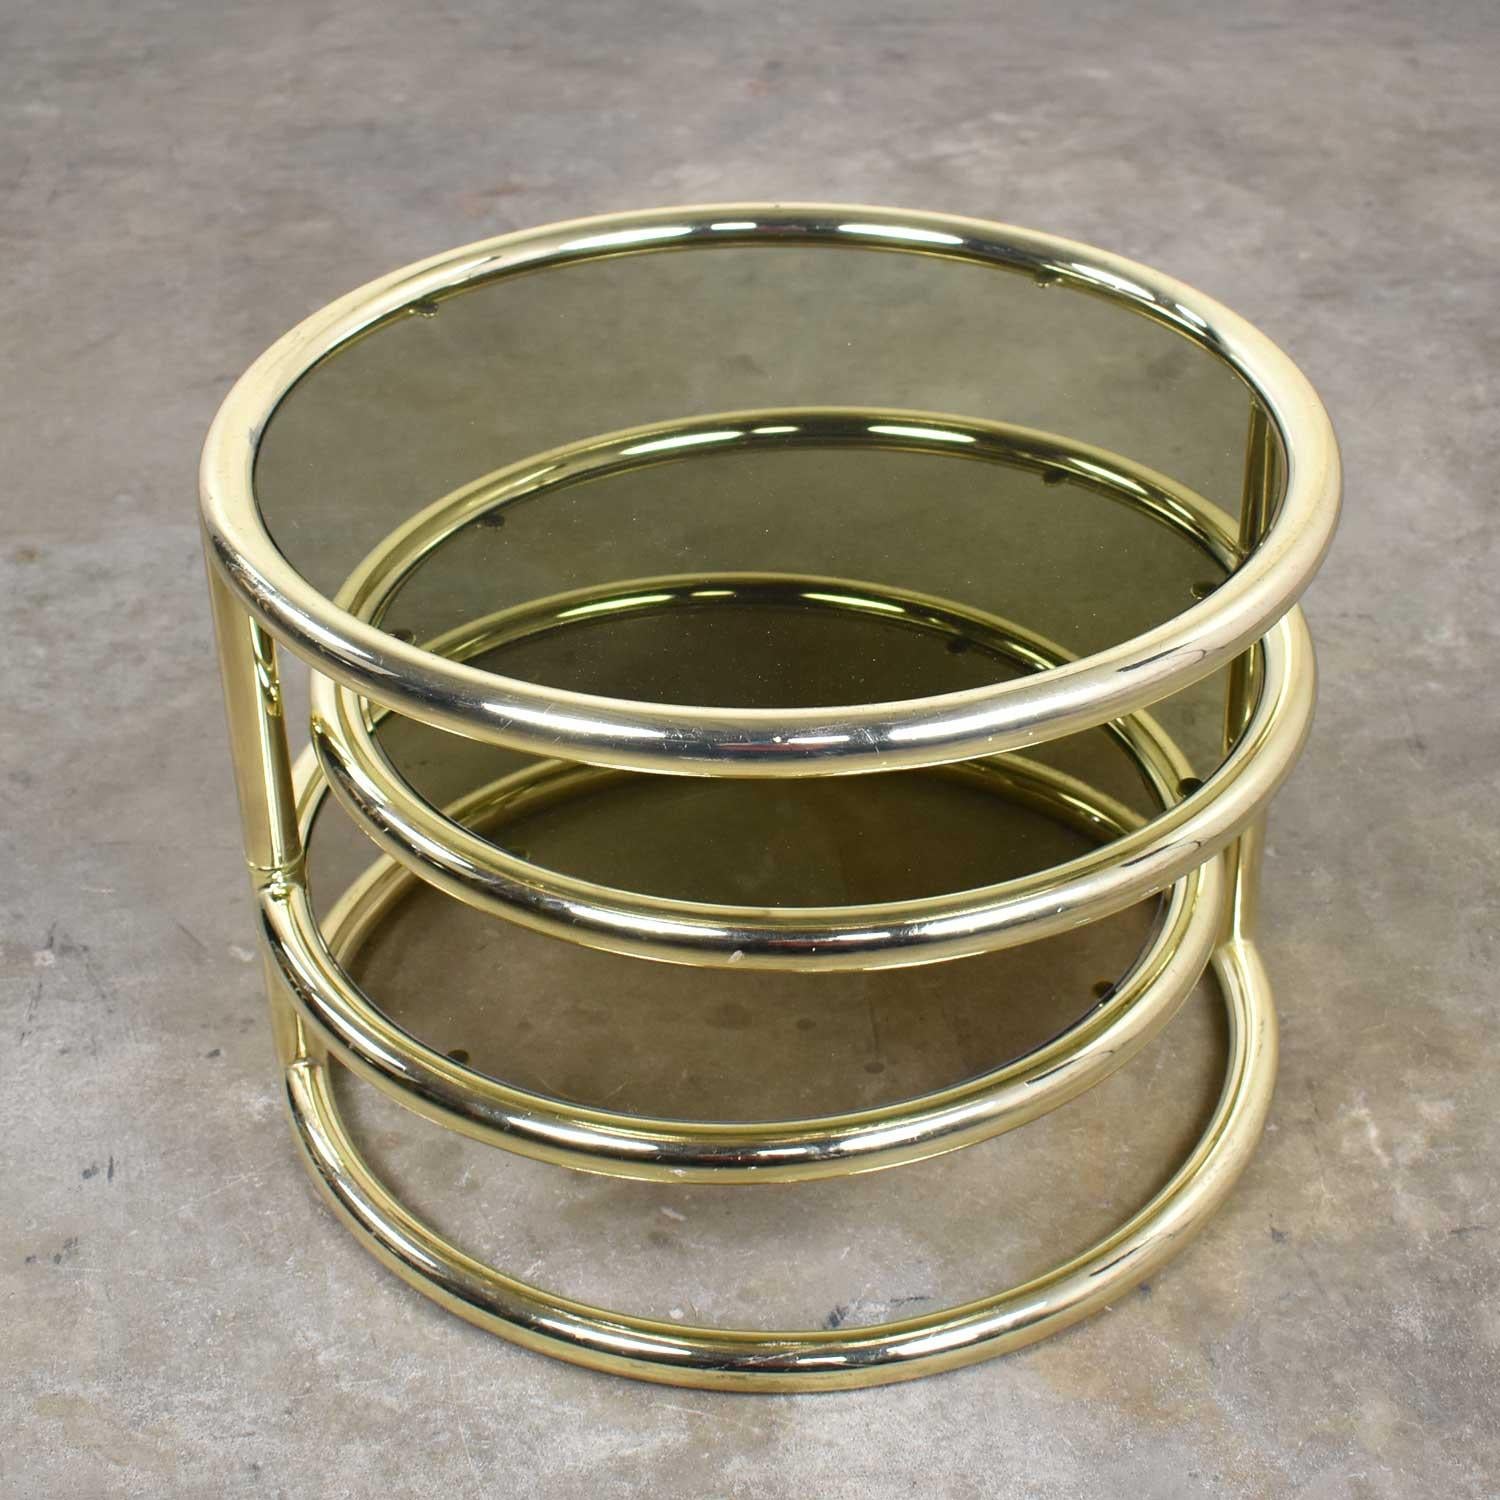 Late 20th Century Modern Round Brass & Smoke Glass End Table or Coffee Table with Pivoting Tiers